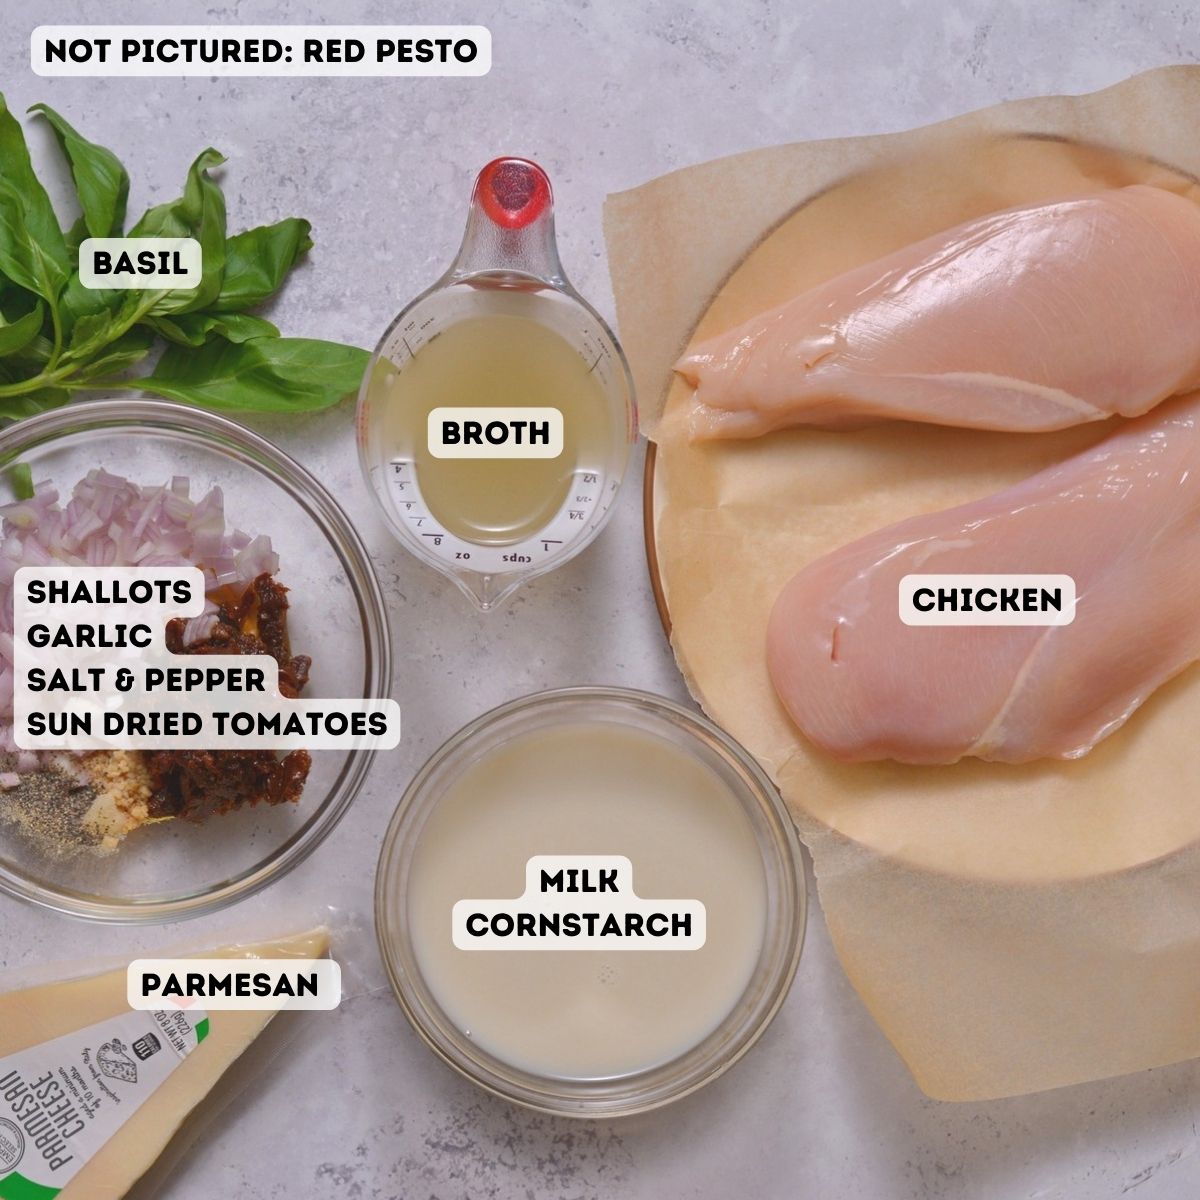 Ingredients including red pesto, chicken, basil, broth, milk, cornstarch, sun dried tomatoes, spices, garlic, and parmesan.